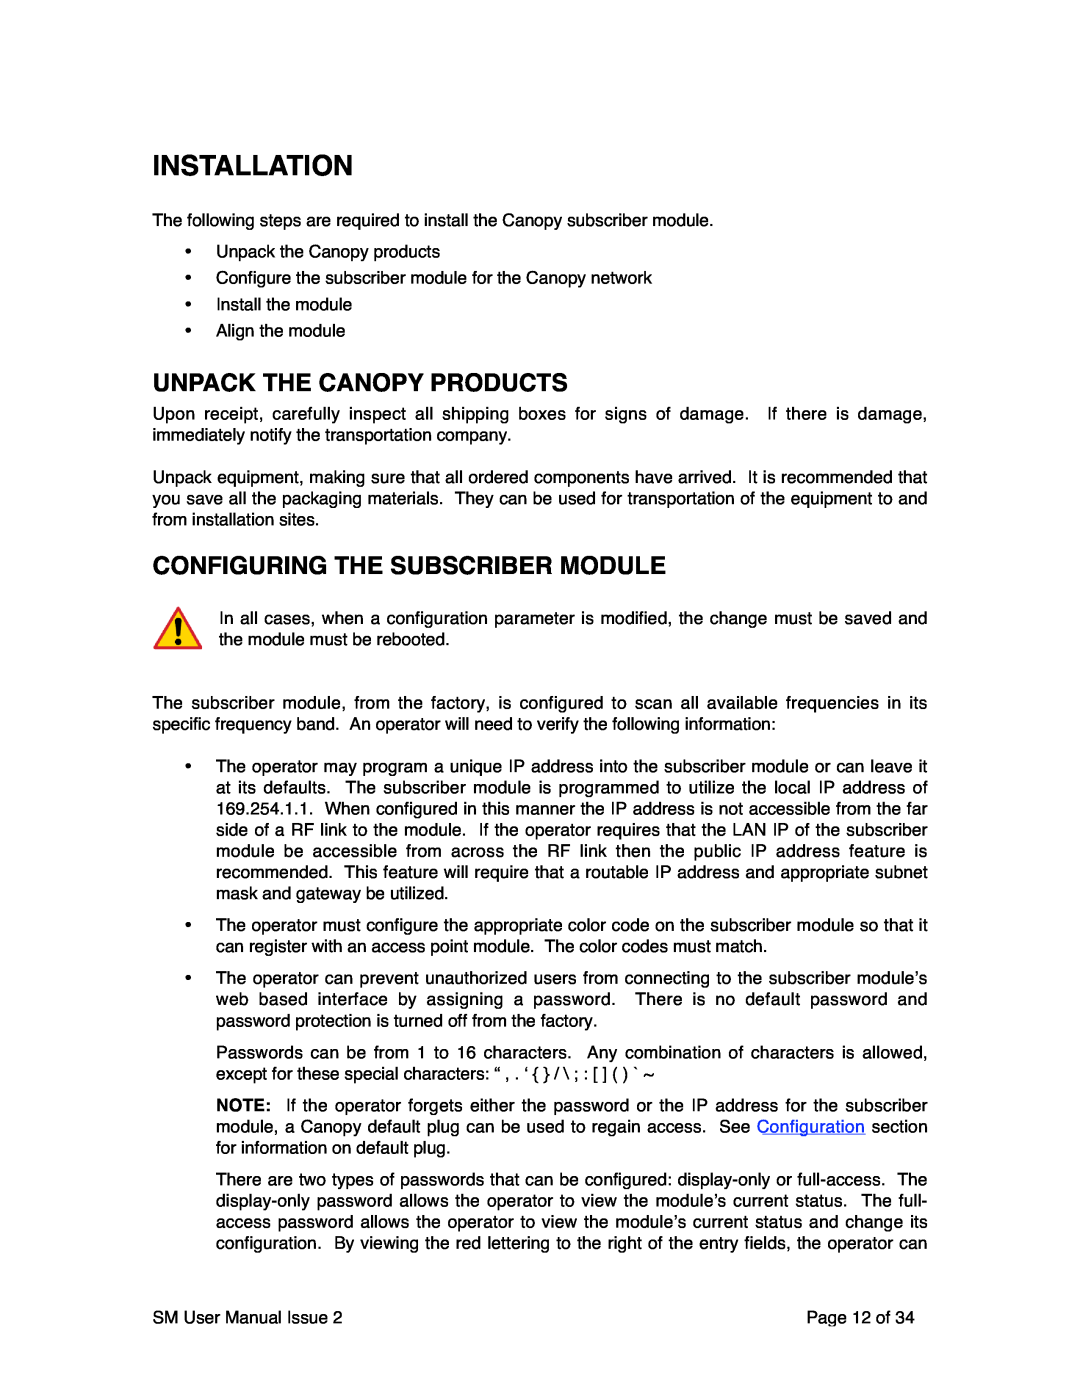 Motorola SM02-UG-en user manual Installation, Unpack The Canopy Products, Configuring The Subscriber Module 